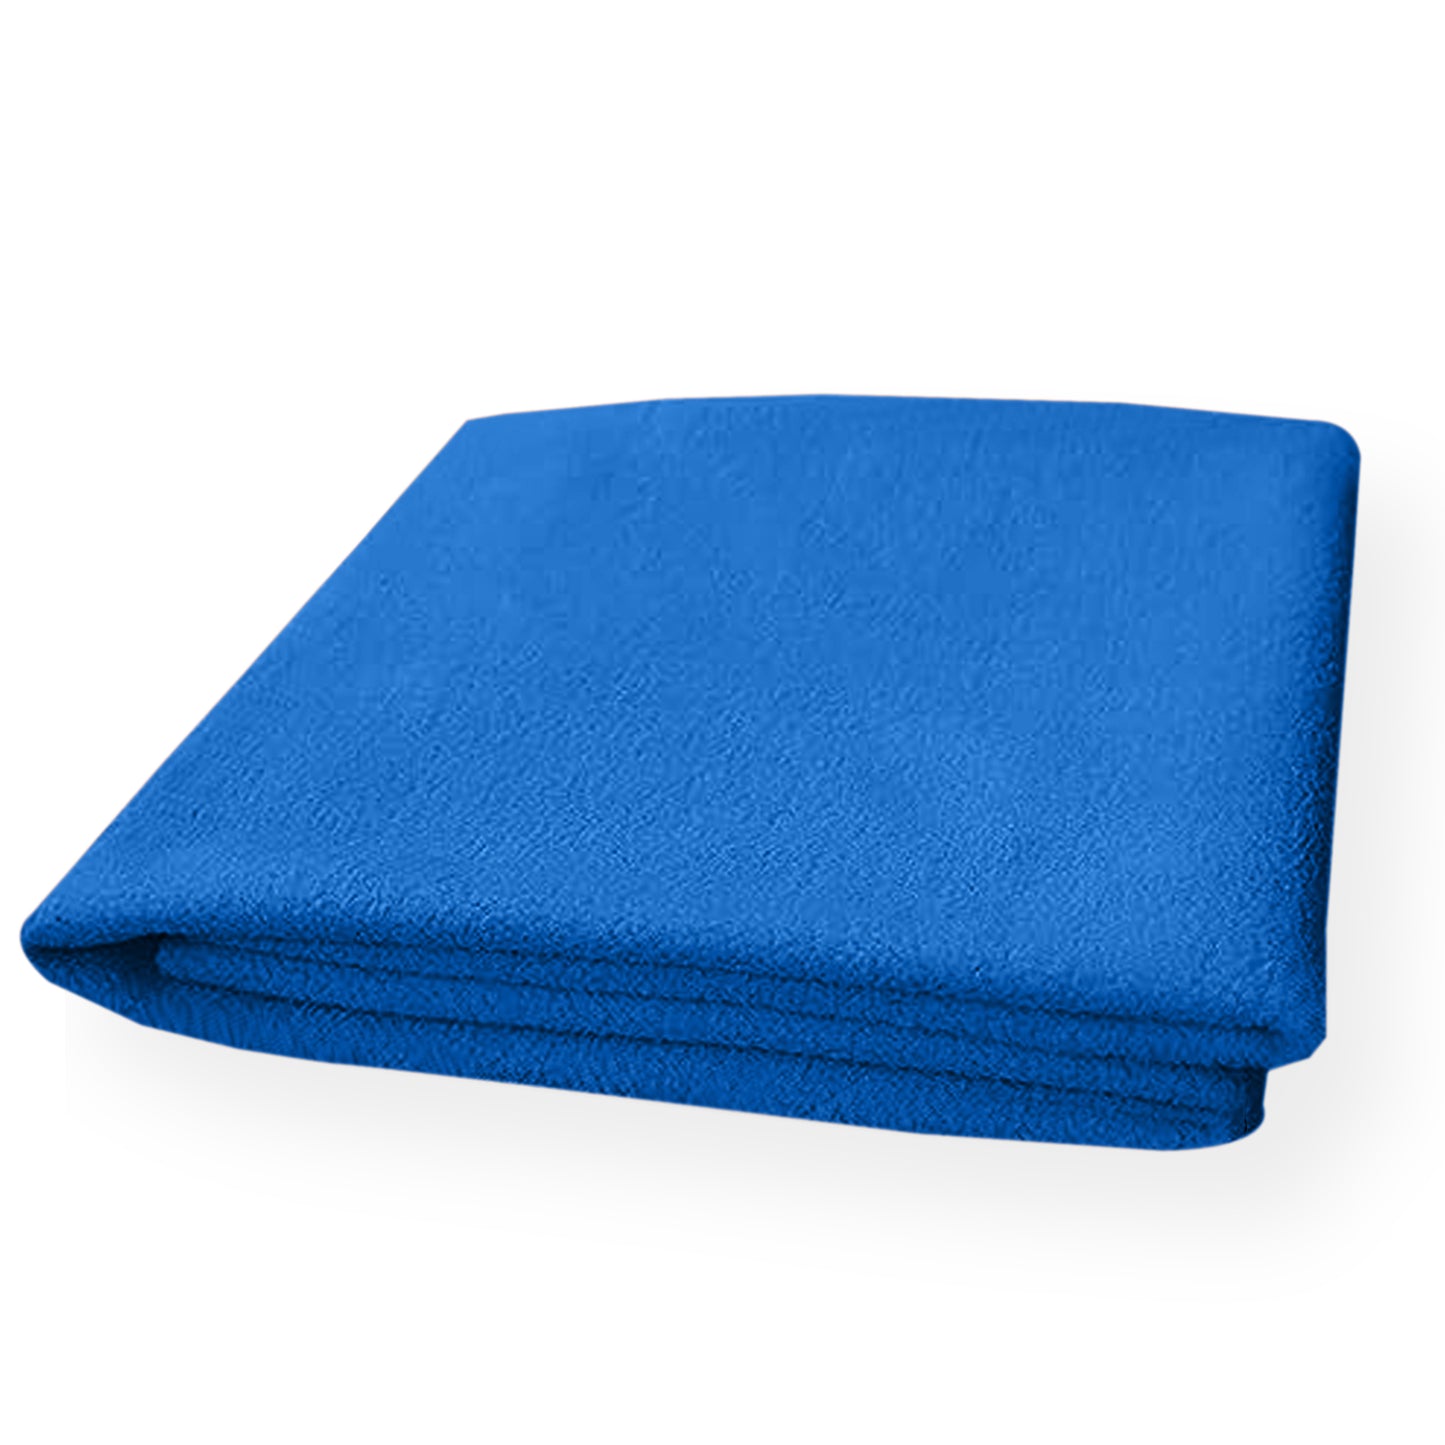 Waterproof Quick Dry Protector Sheet, Baby Bed Protector, Large Size (140 X 100 CM), Pack of 1 -ROYAL BLUE